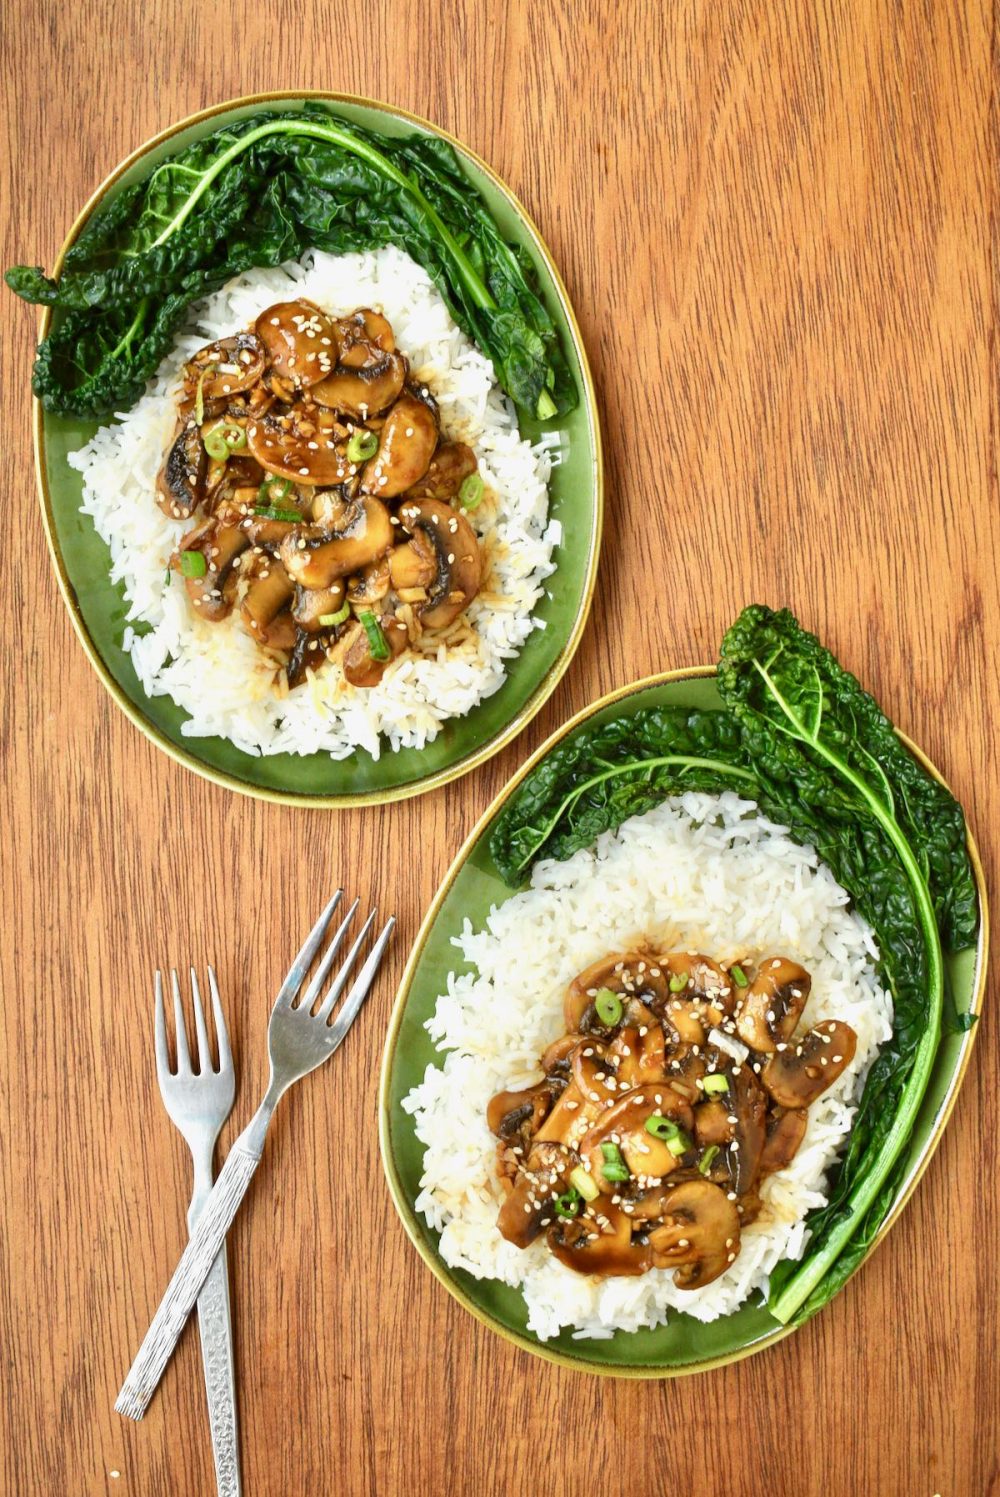 Two green plates with rice, steamed kale and teriyaki mushrooms garnished with sesame seeds and spring onion